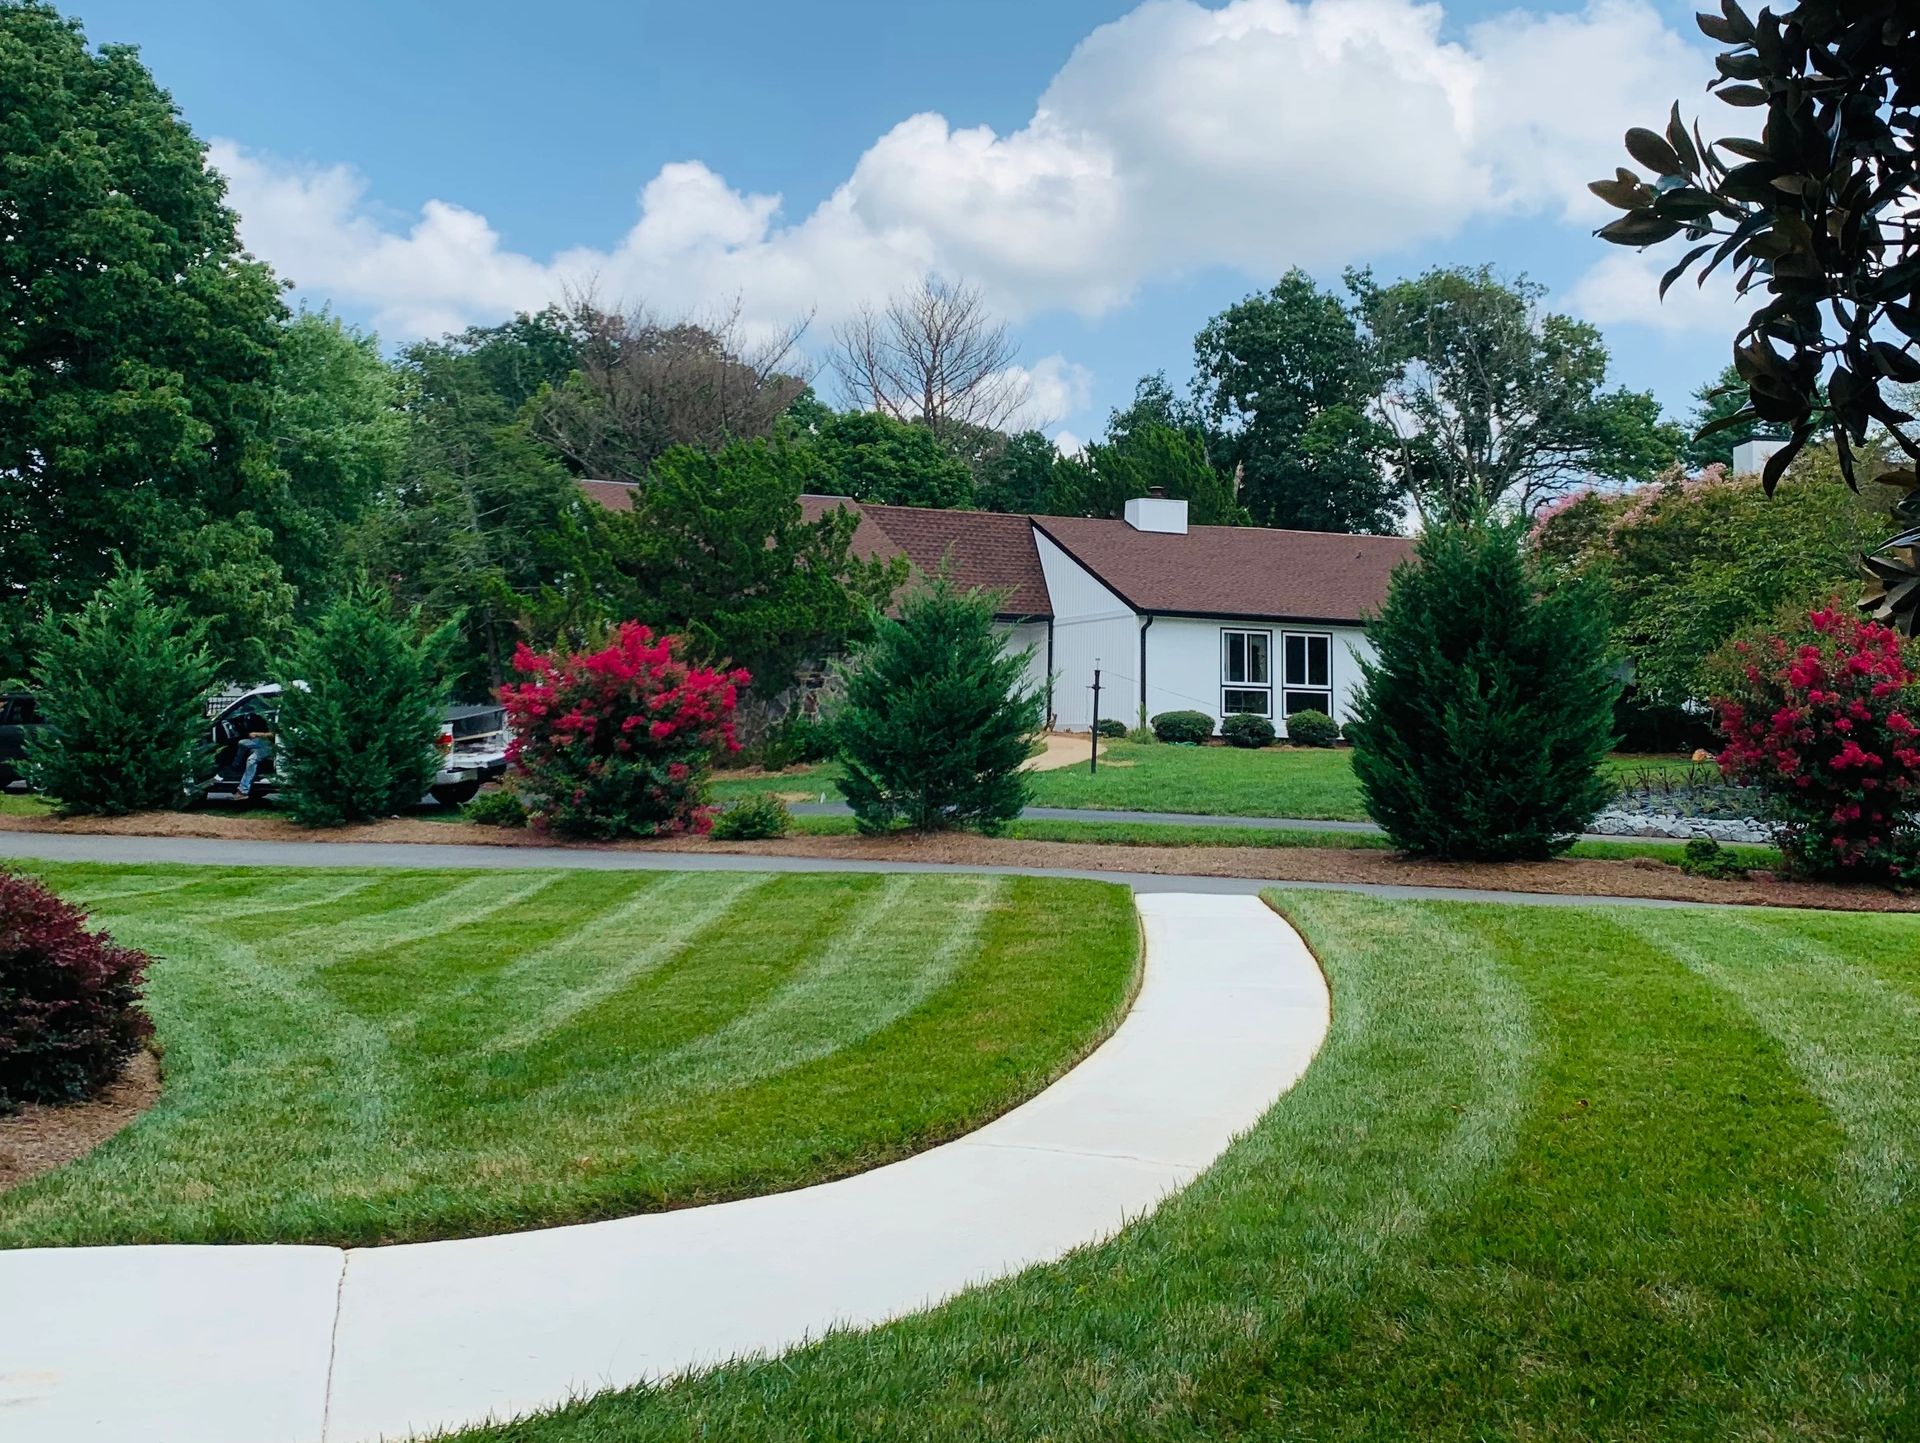 A manicured lawn with curved mowing lines leads up to a white house with dark shutters 